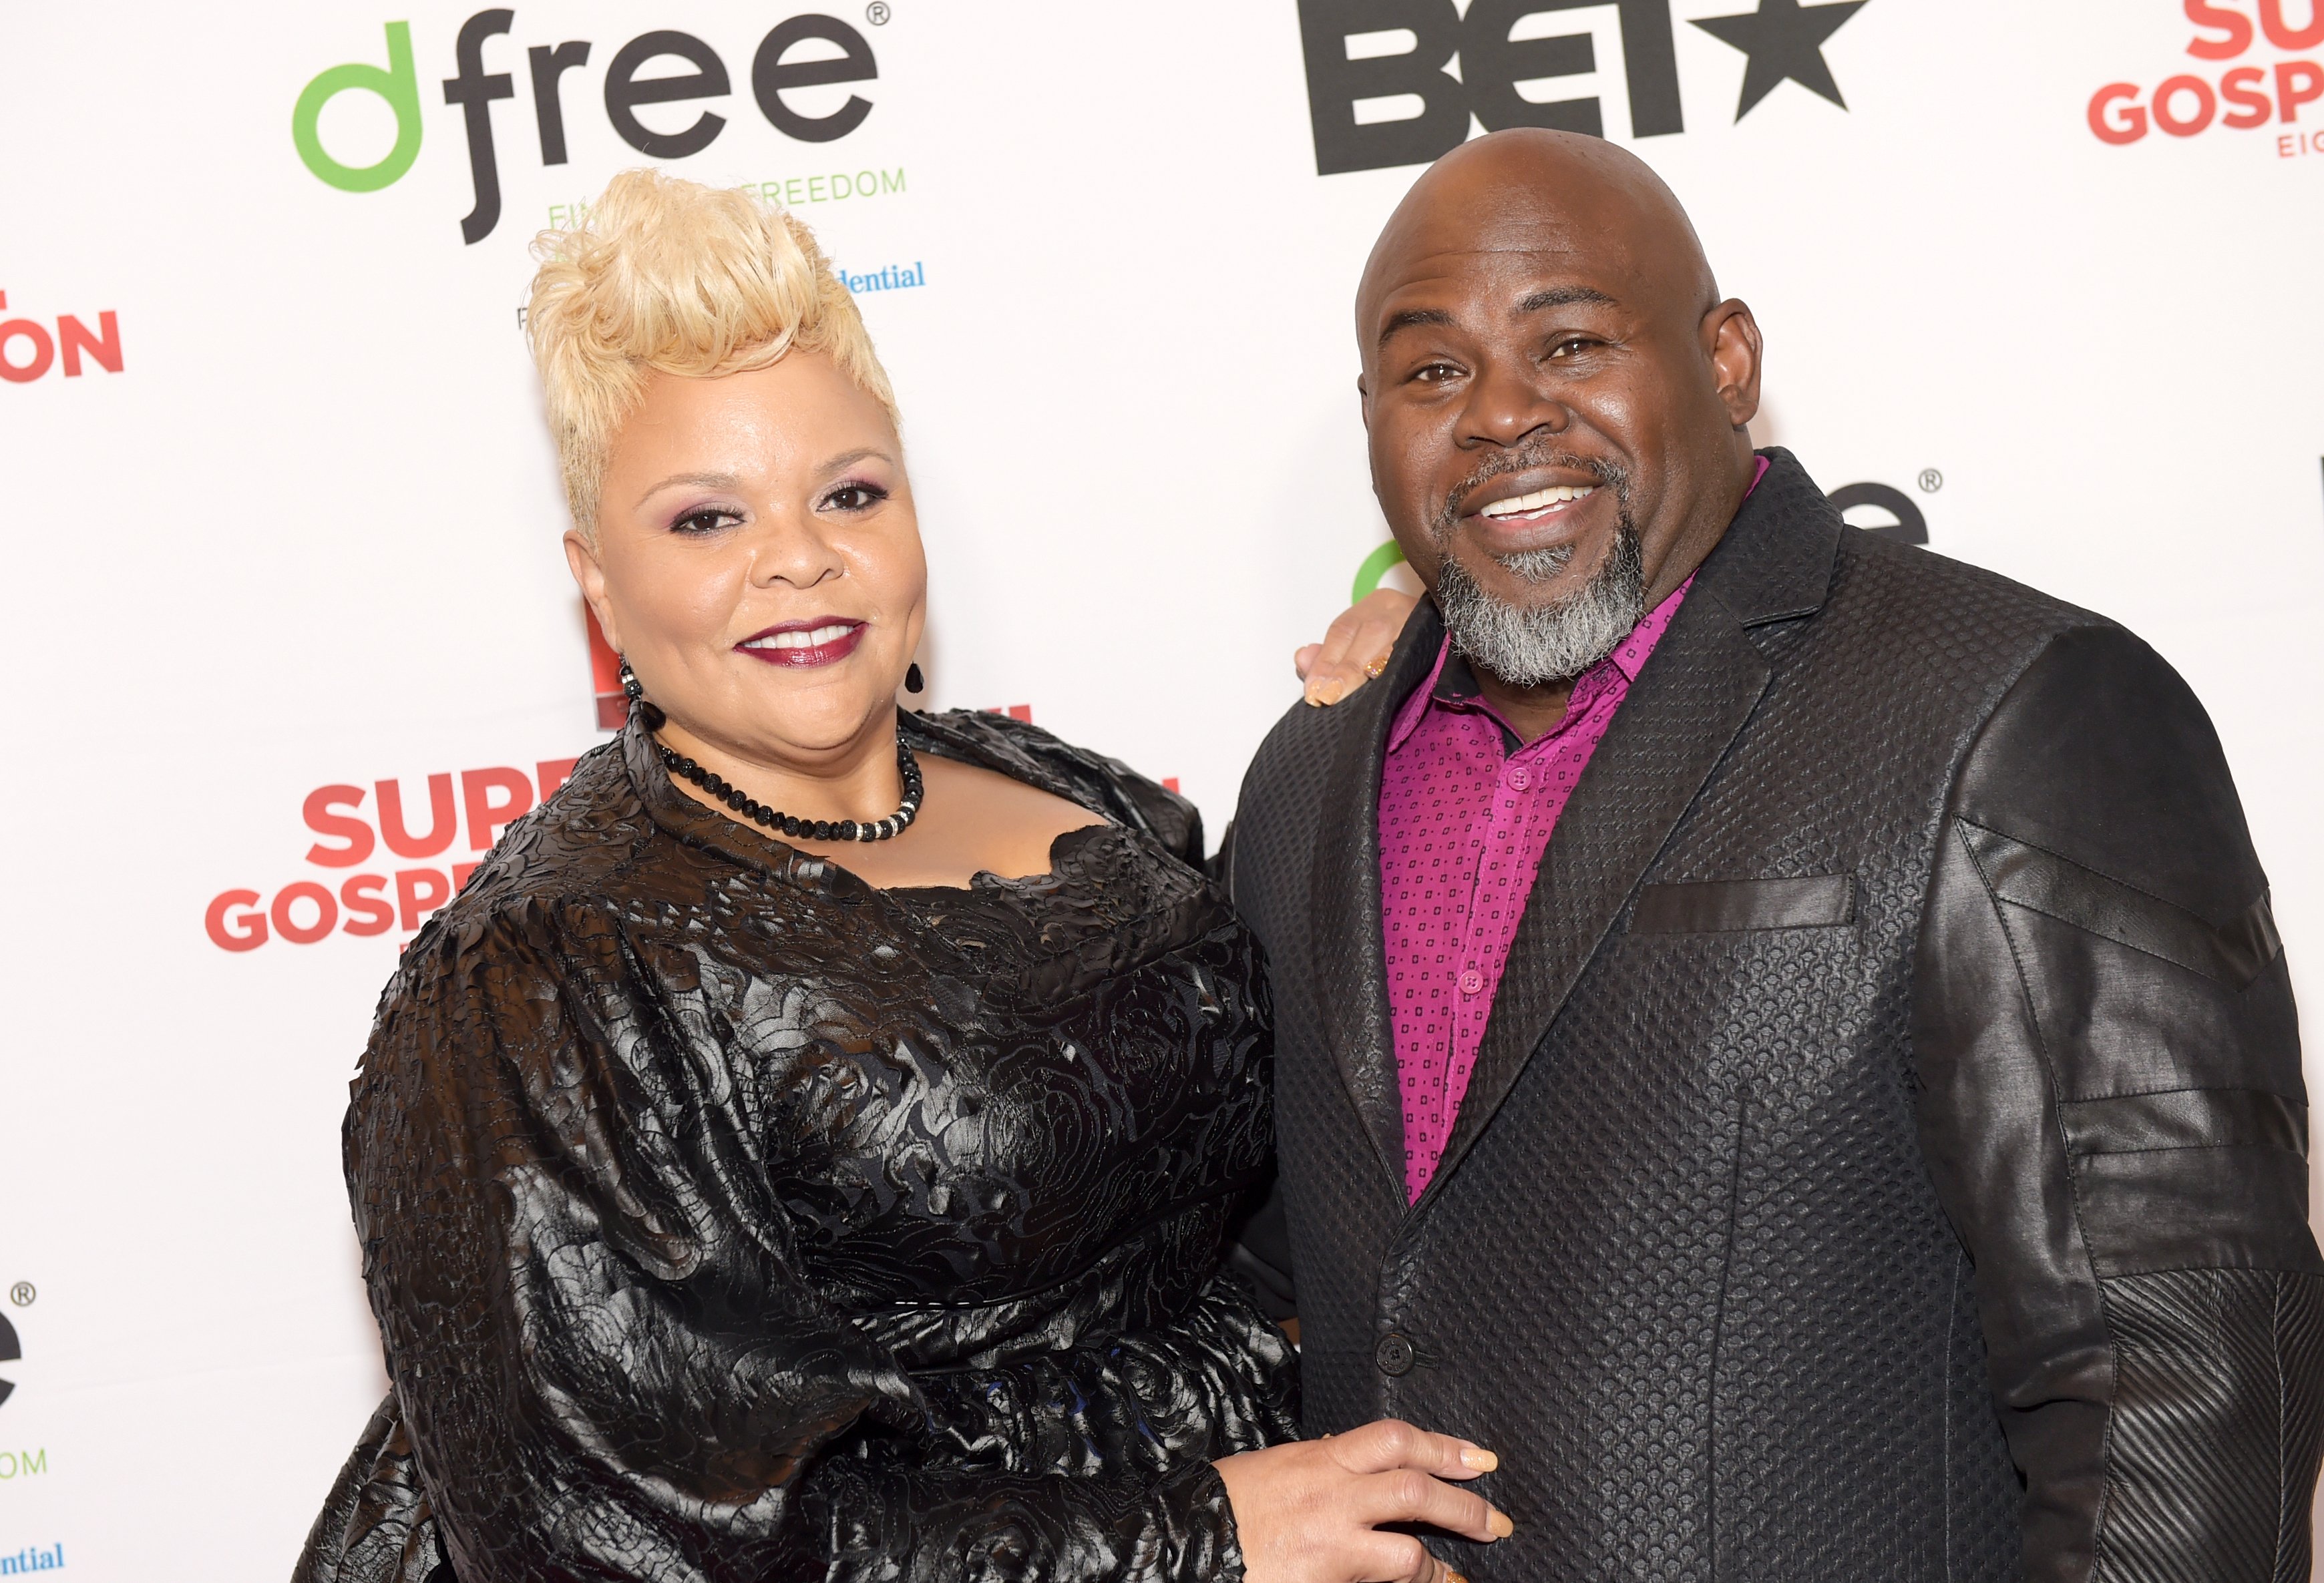  Tamela Mann and David Mann at the BET Presents Super Bowl Gospel Celebration on February 3, 2017. | Photo: Getty Images